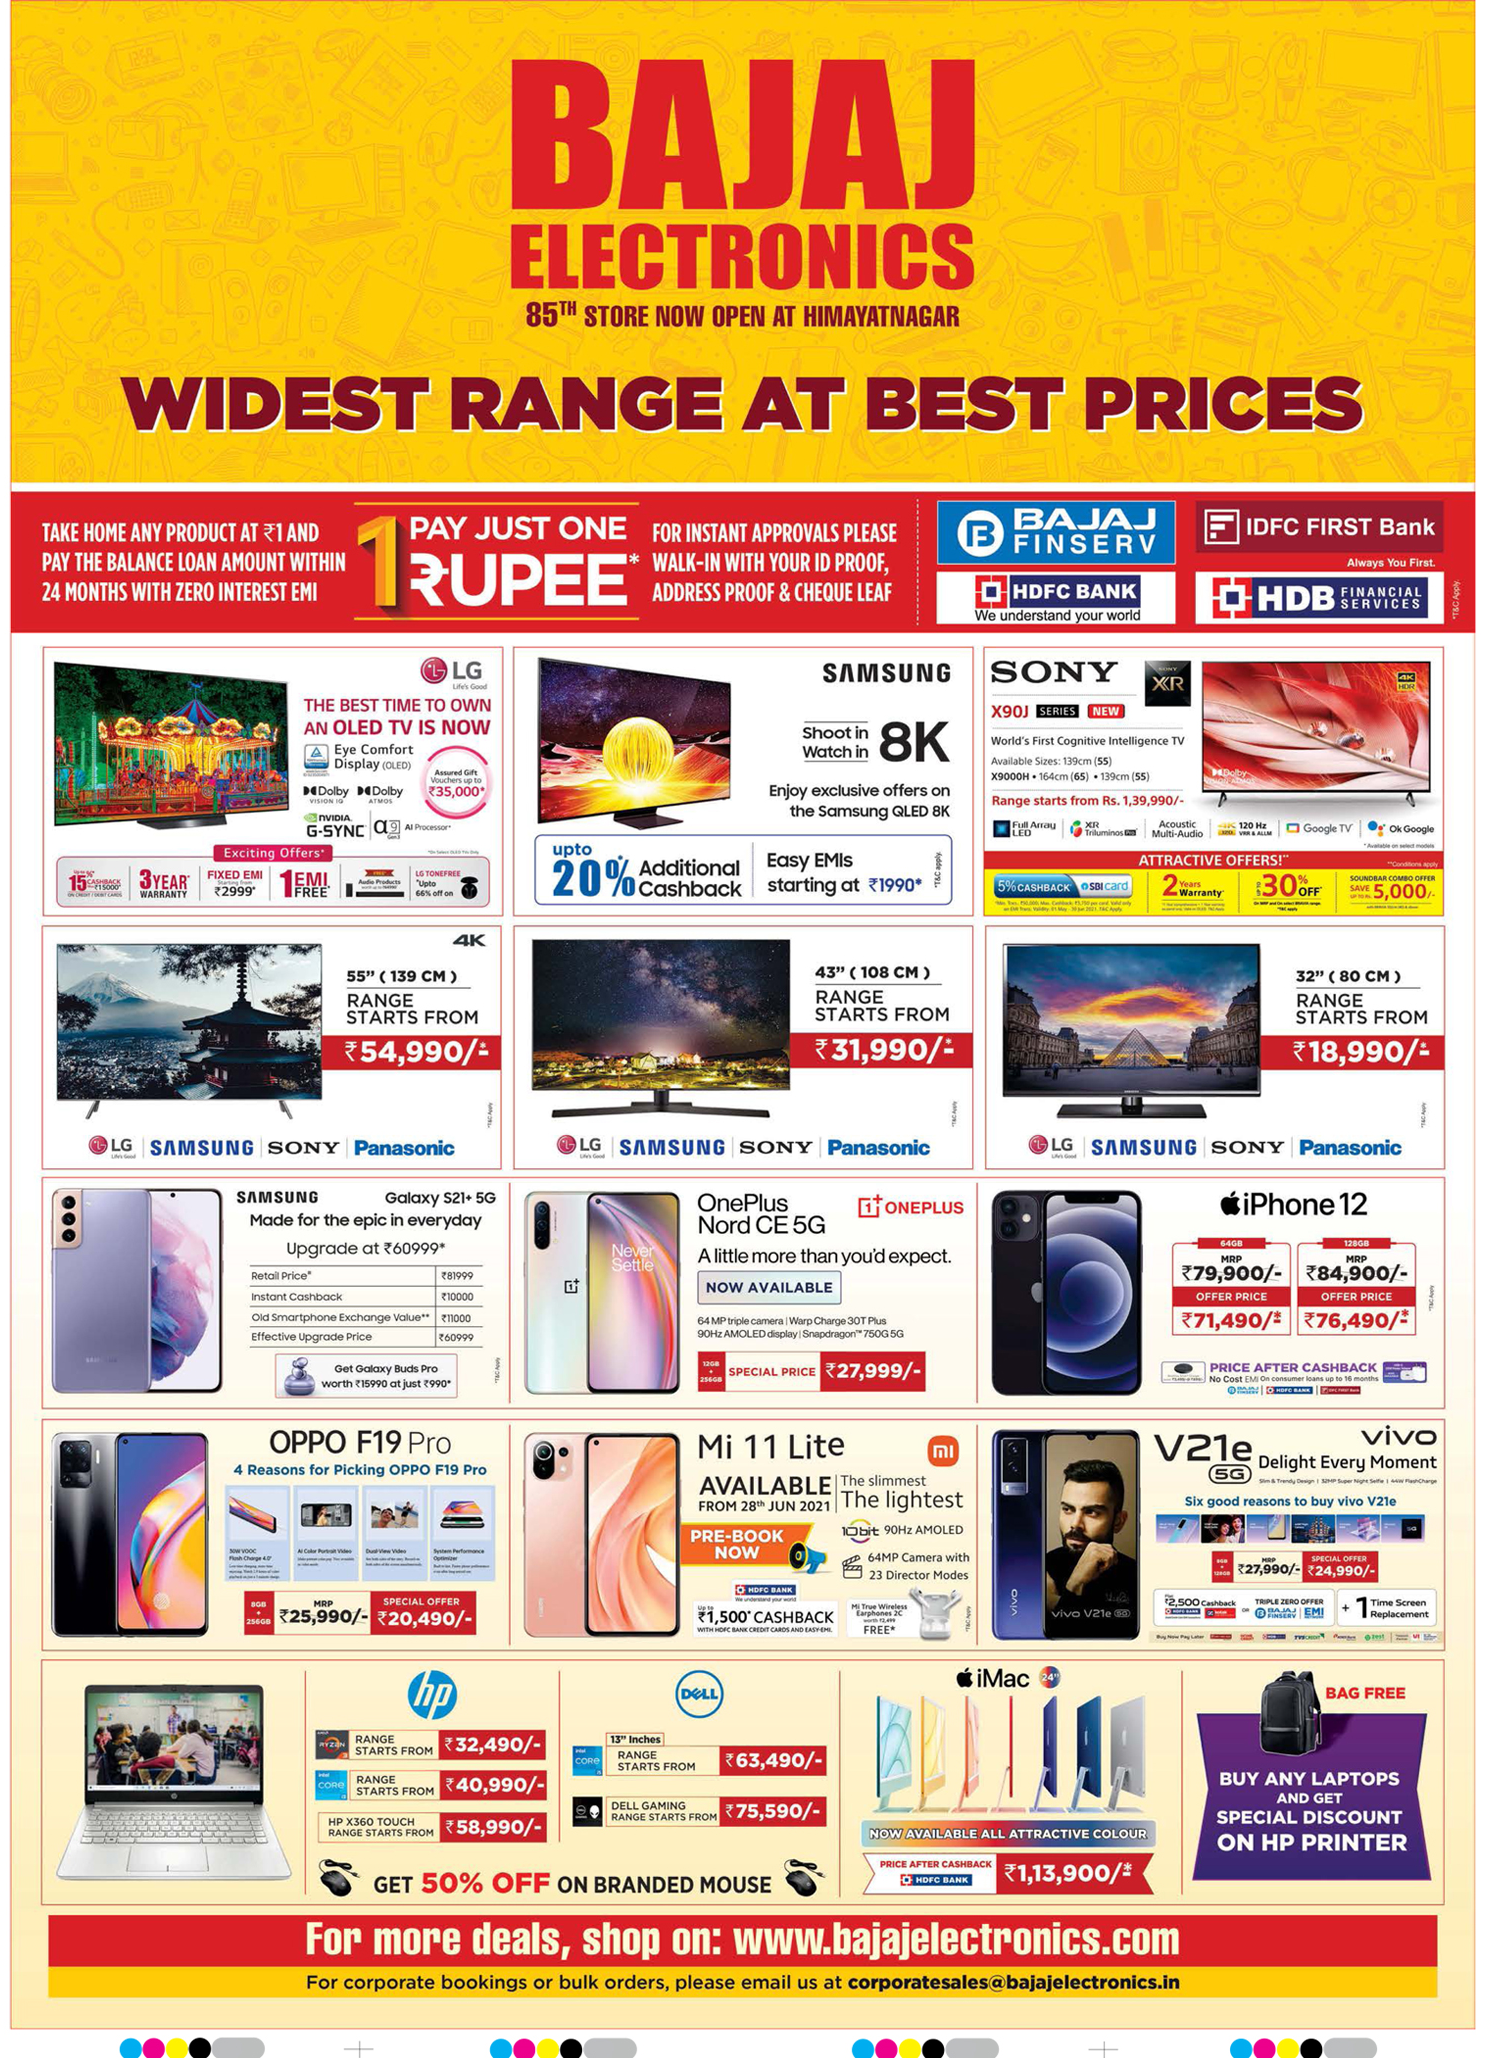 bajaj-electronics-widest-range-at-best-prices-ad-deccan-chronicle-hyderabad-27-06-2021